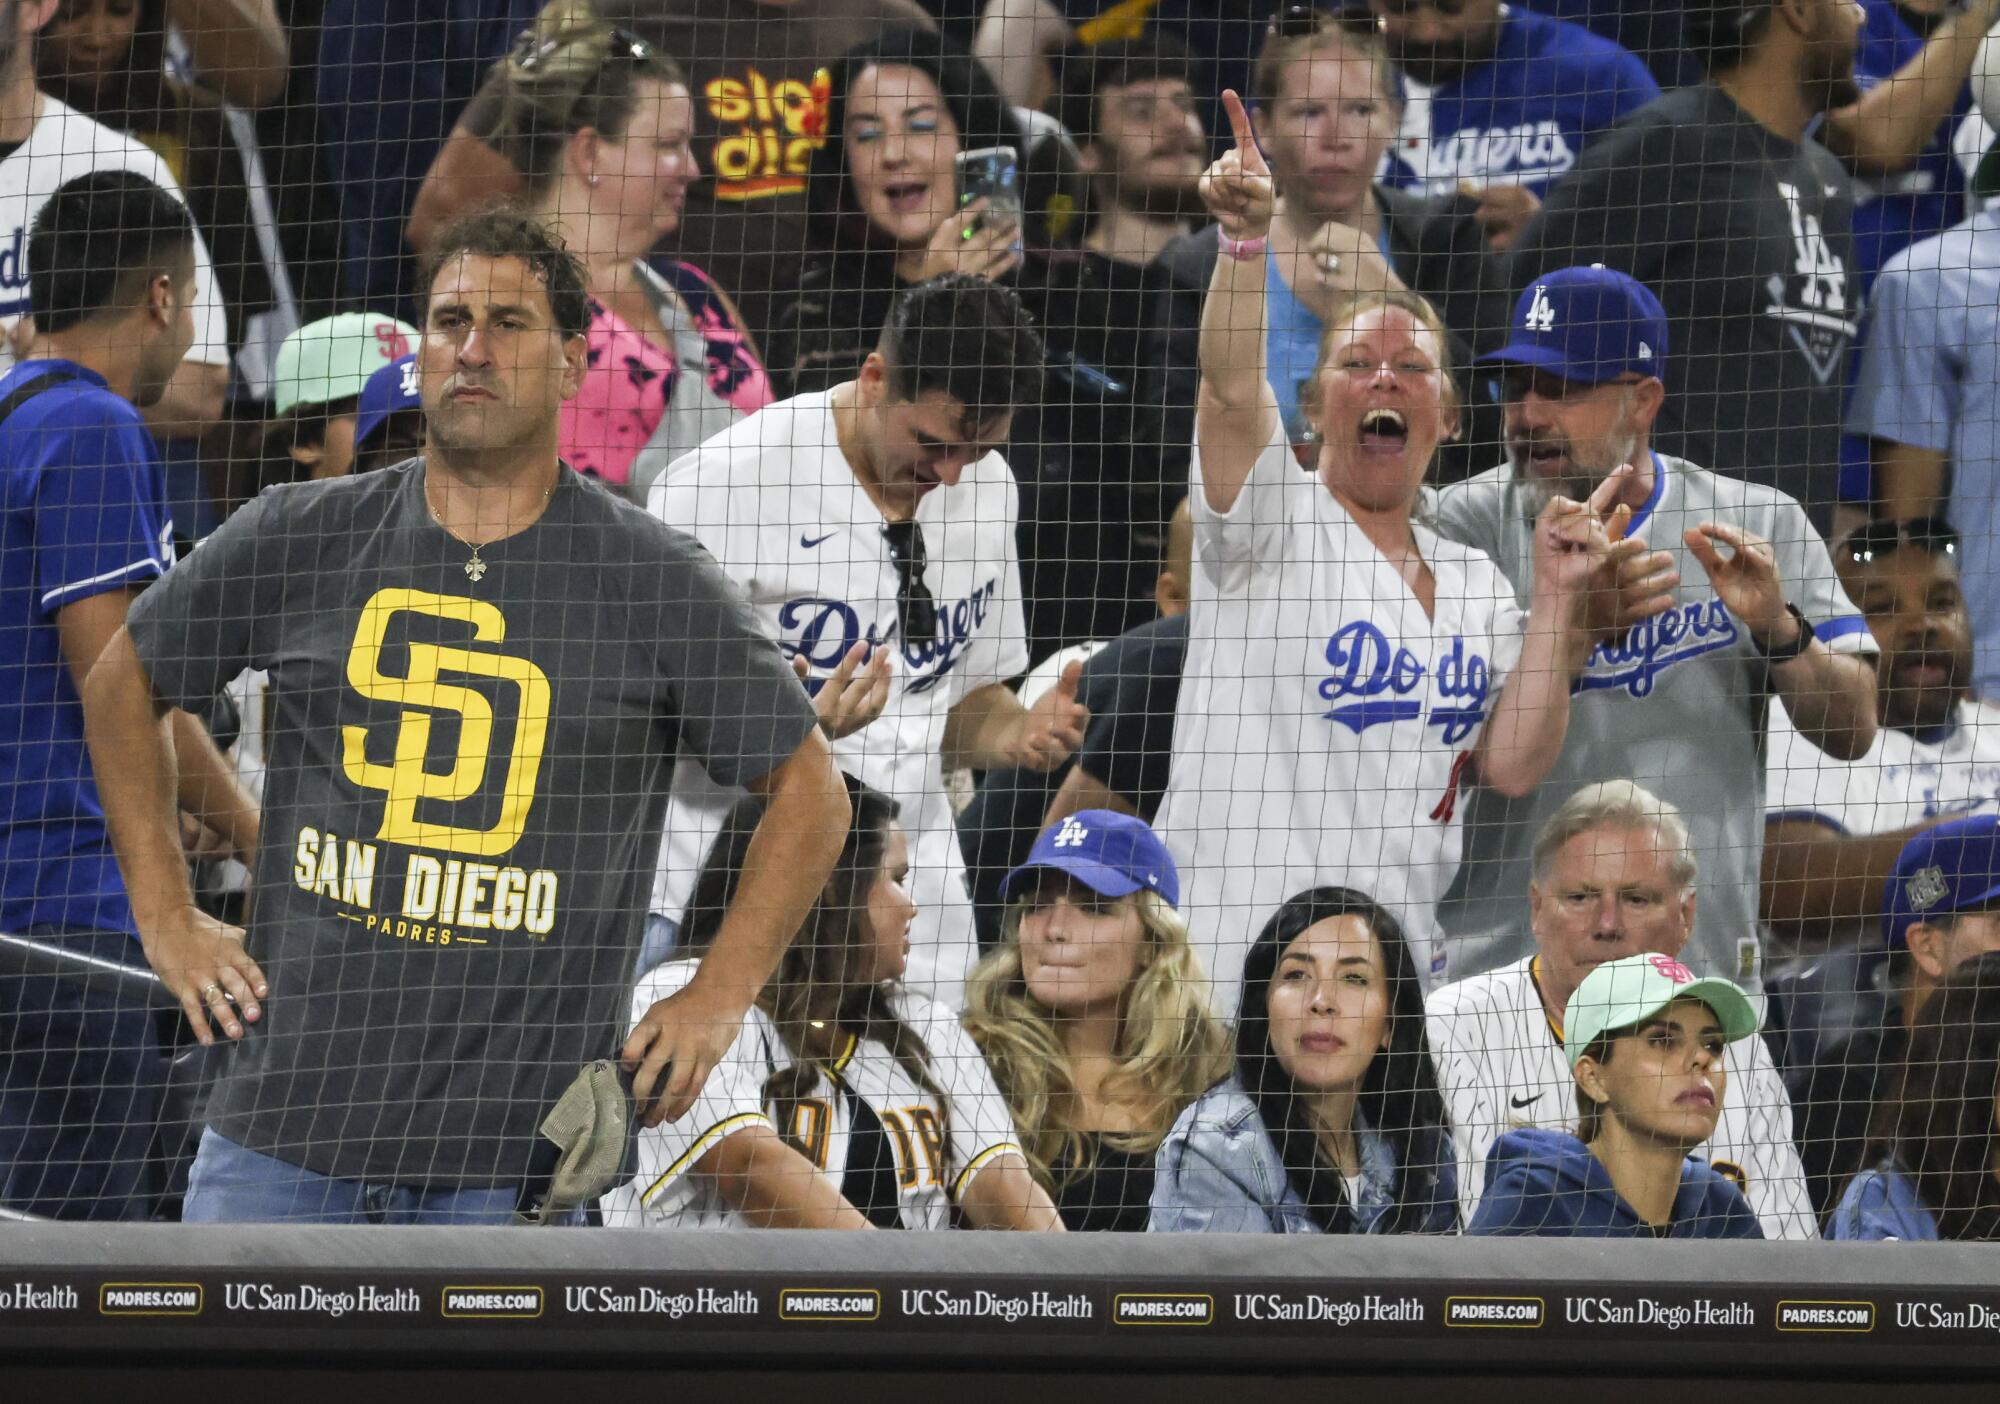 Padres fans wrestle with wasted season, look ahead — cautiously